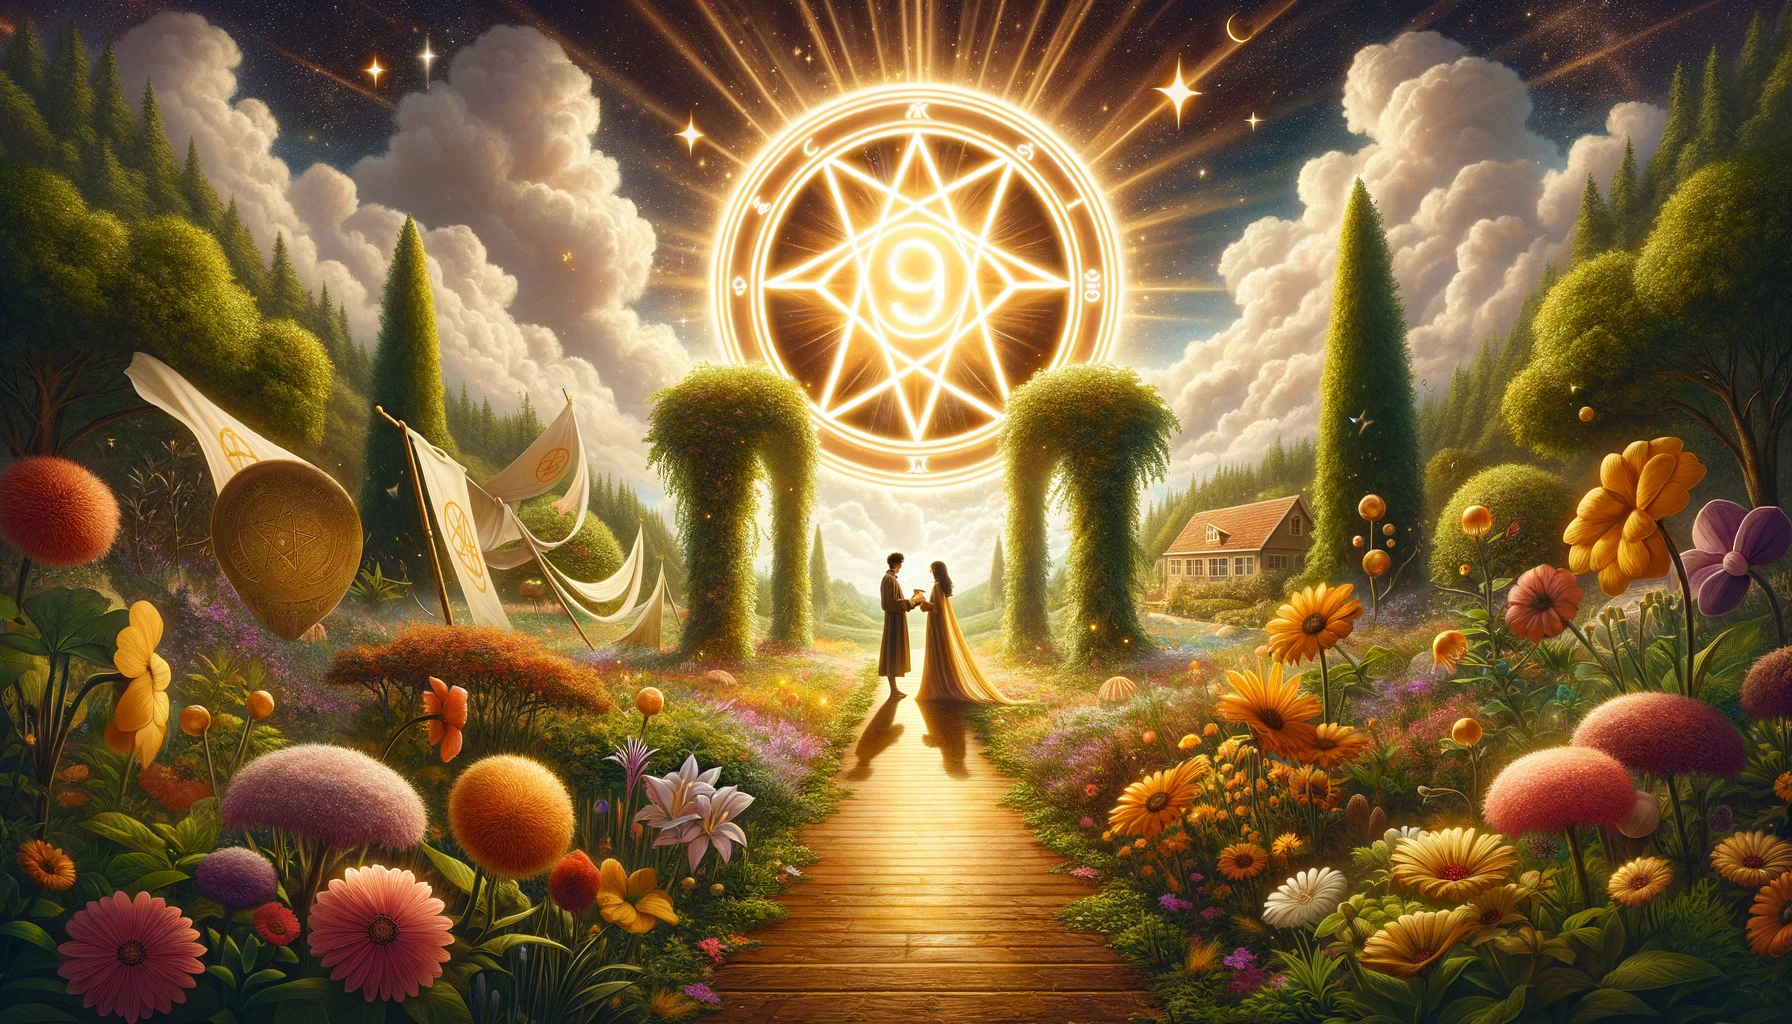 An illustration depicting the journey of growth, prosperity, and the realization of shared dreams within a relationship, set in a magical garden symbolizing the flourishing and fertile nature of love, as portrayed by the Ace of Pentacles in a romantic context.